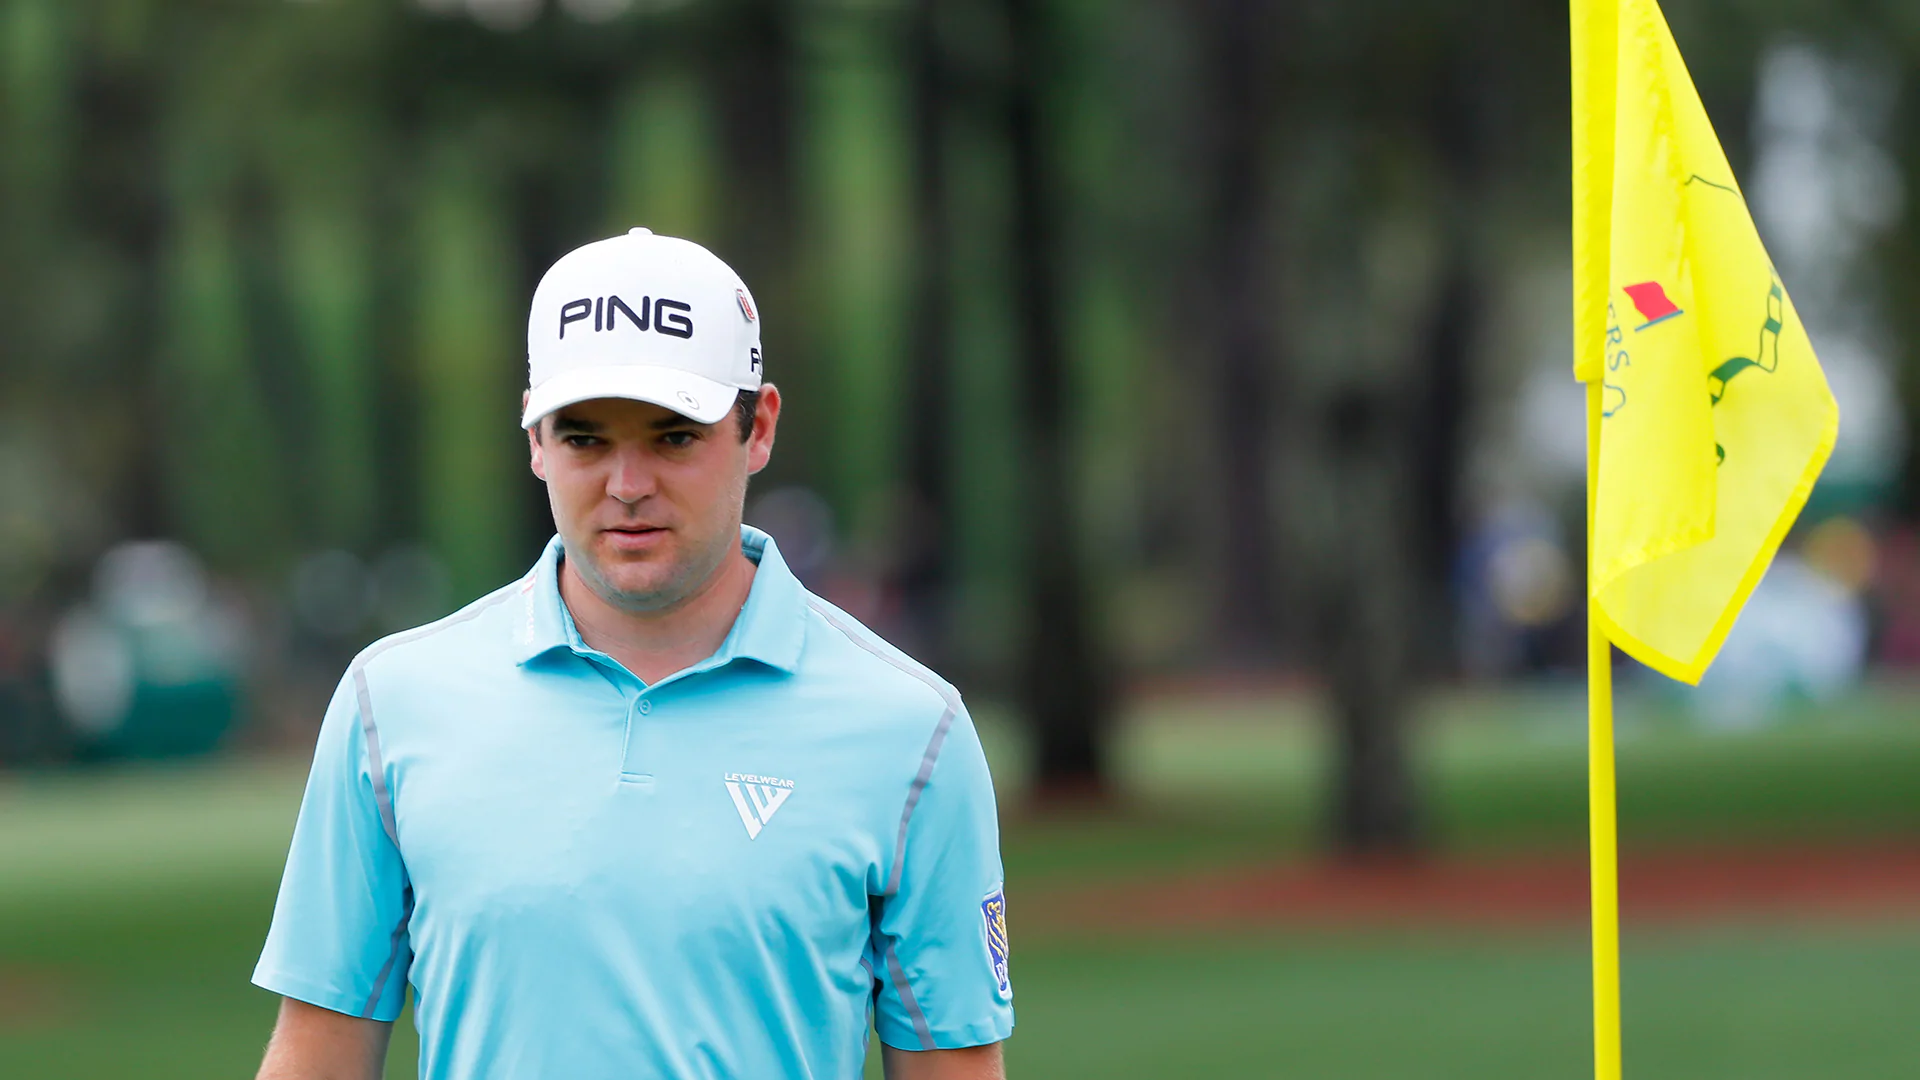 Last man in the Masters, Conners relishes 'rollercoaster' ride